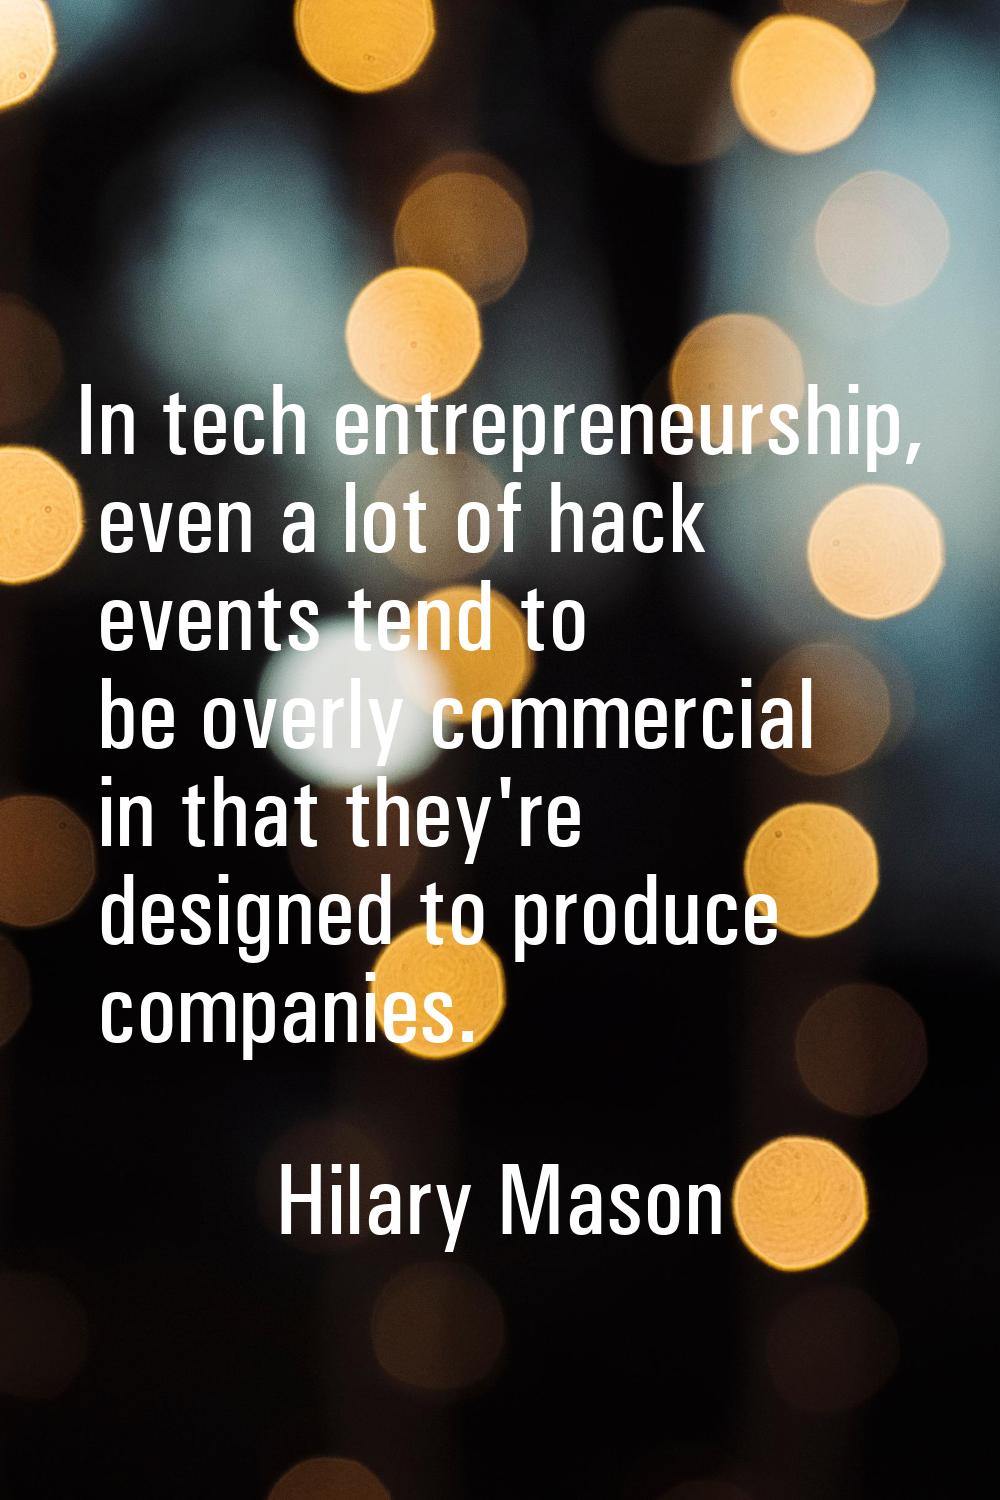 In tech entrepreneurship, even a lot of hack events tend to be overly commercial in that they're de